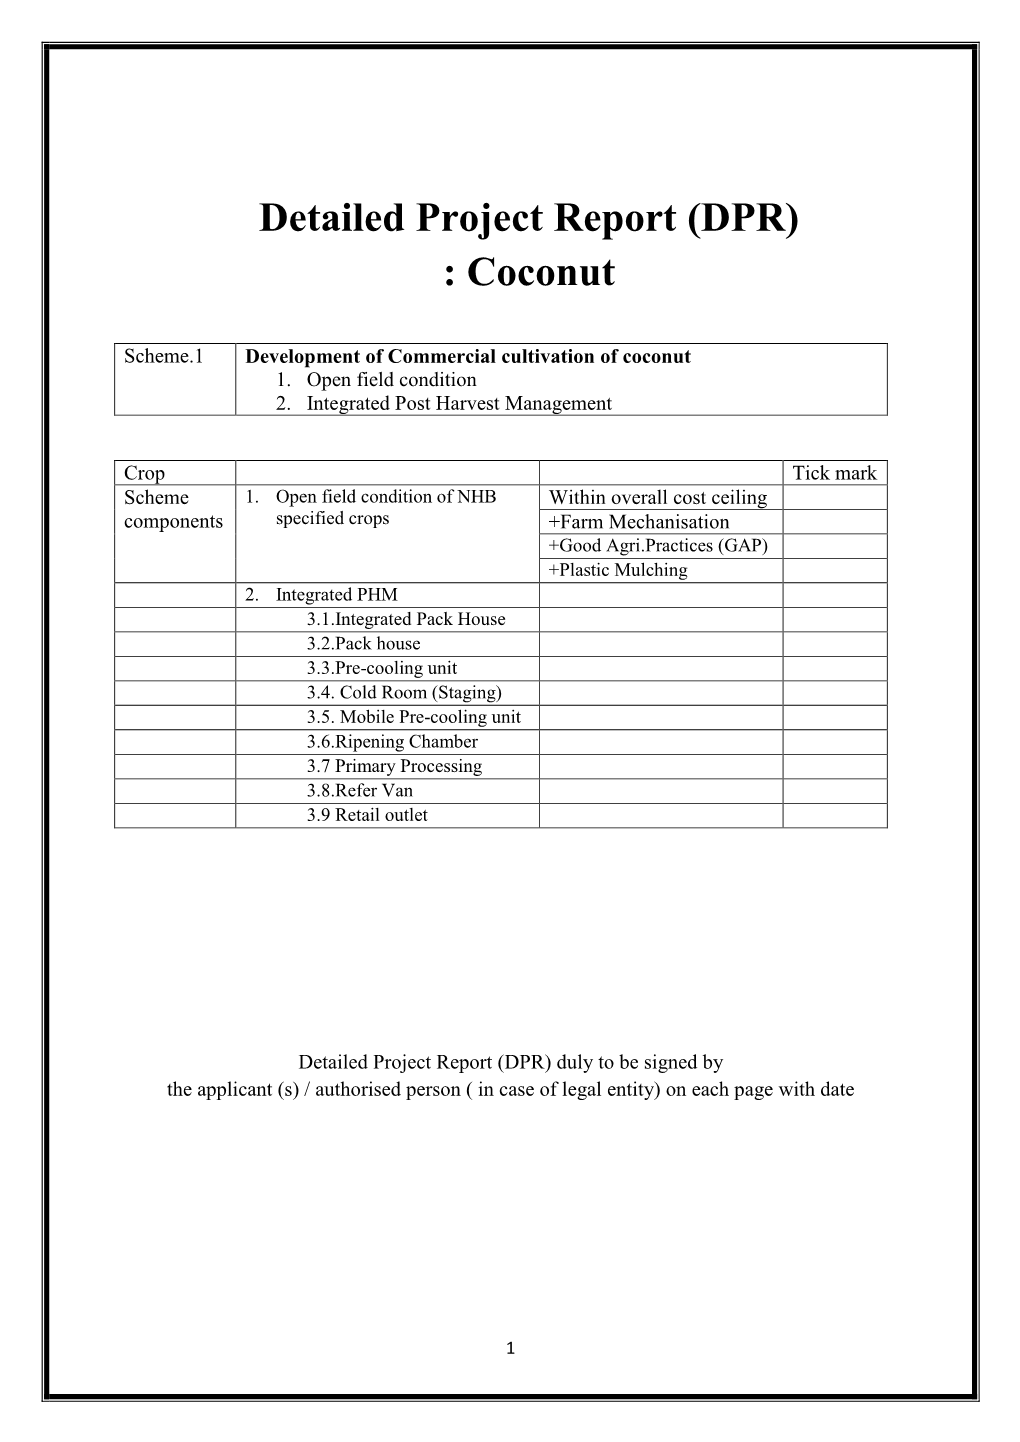 Detailed Project Report (DPR) : Coconut